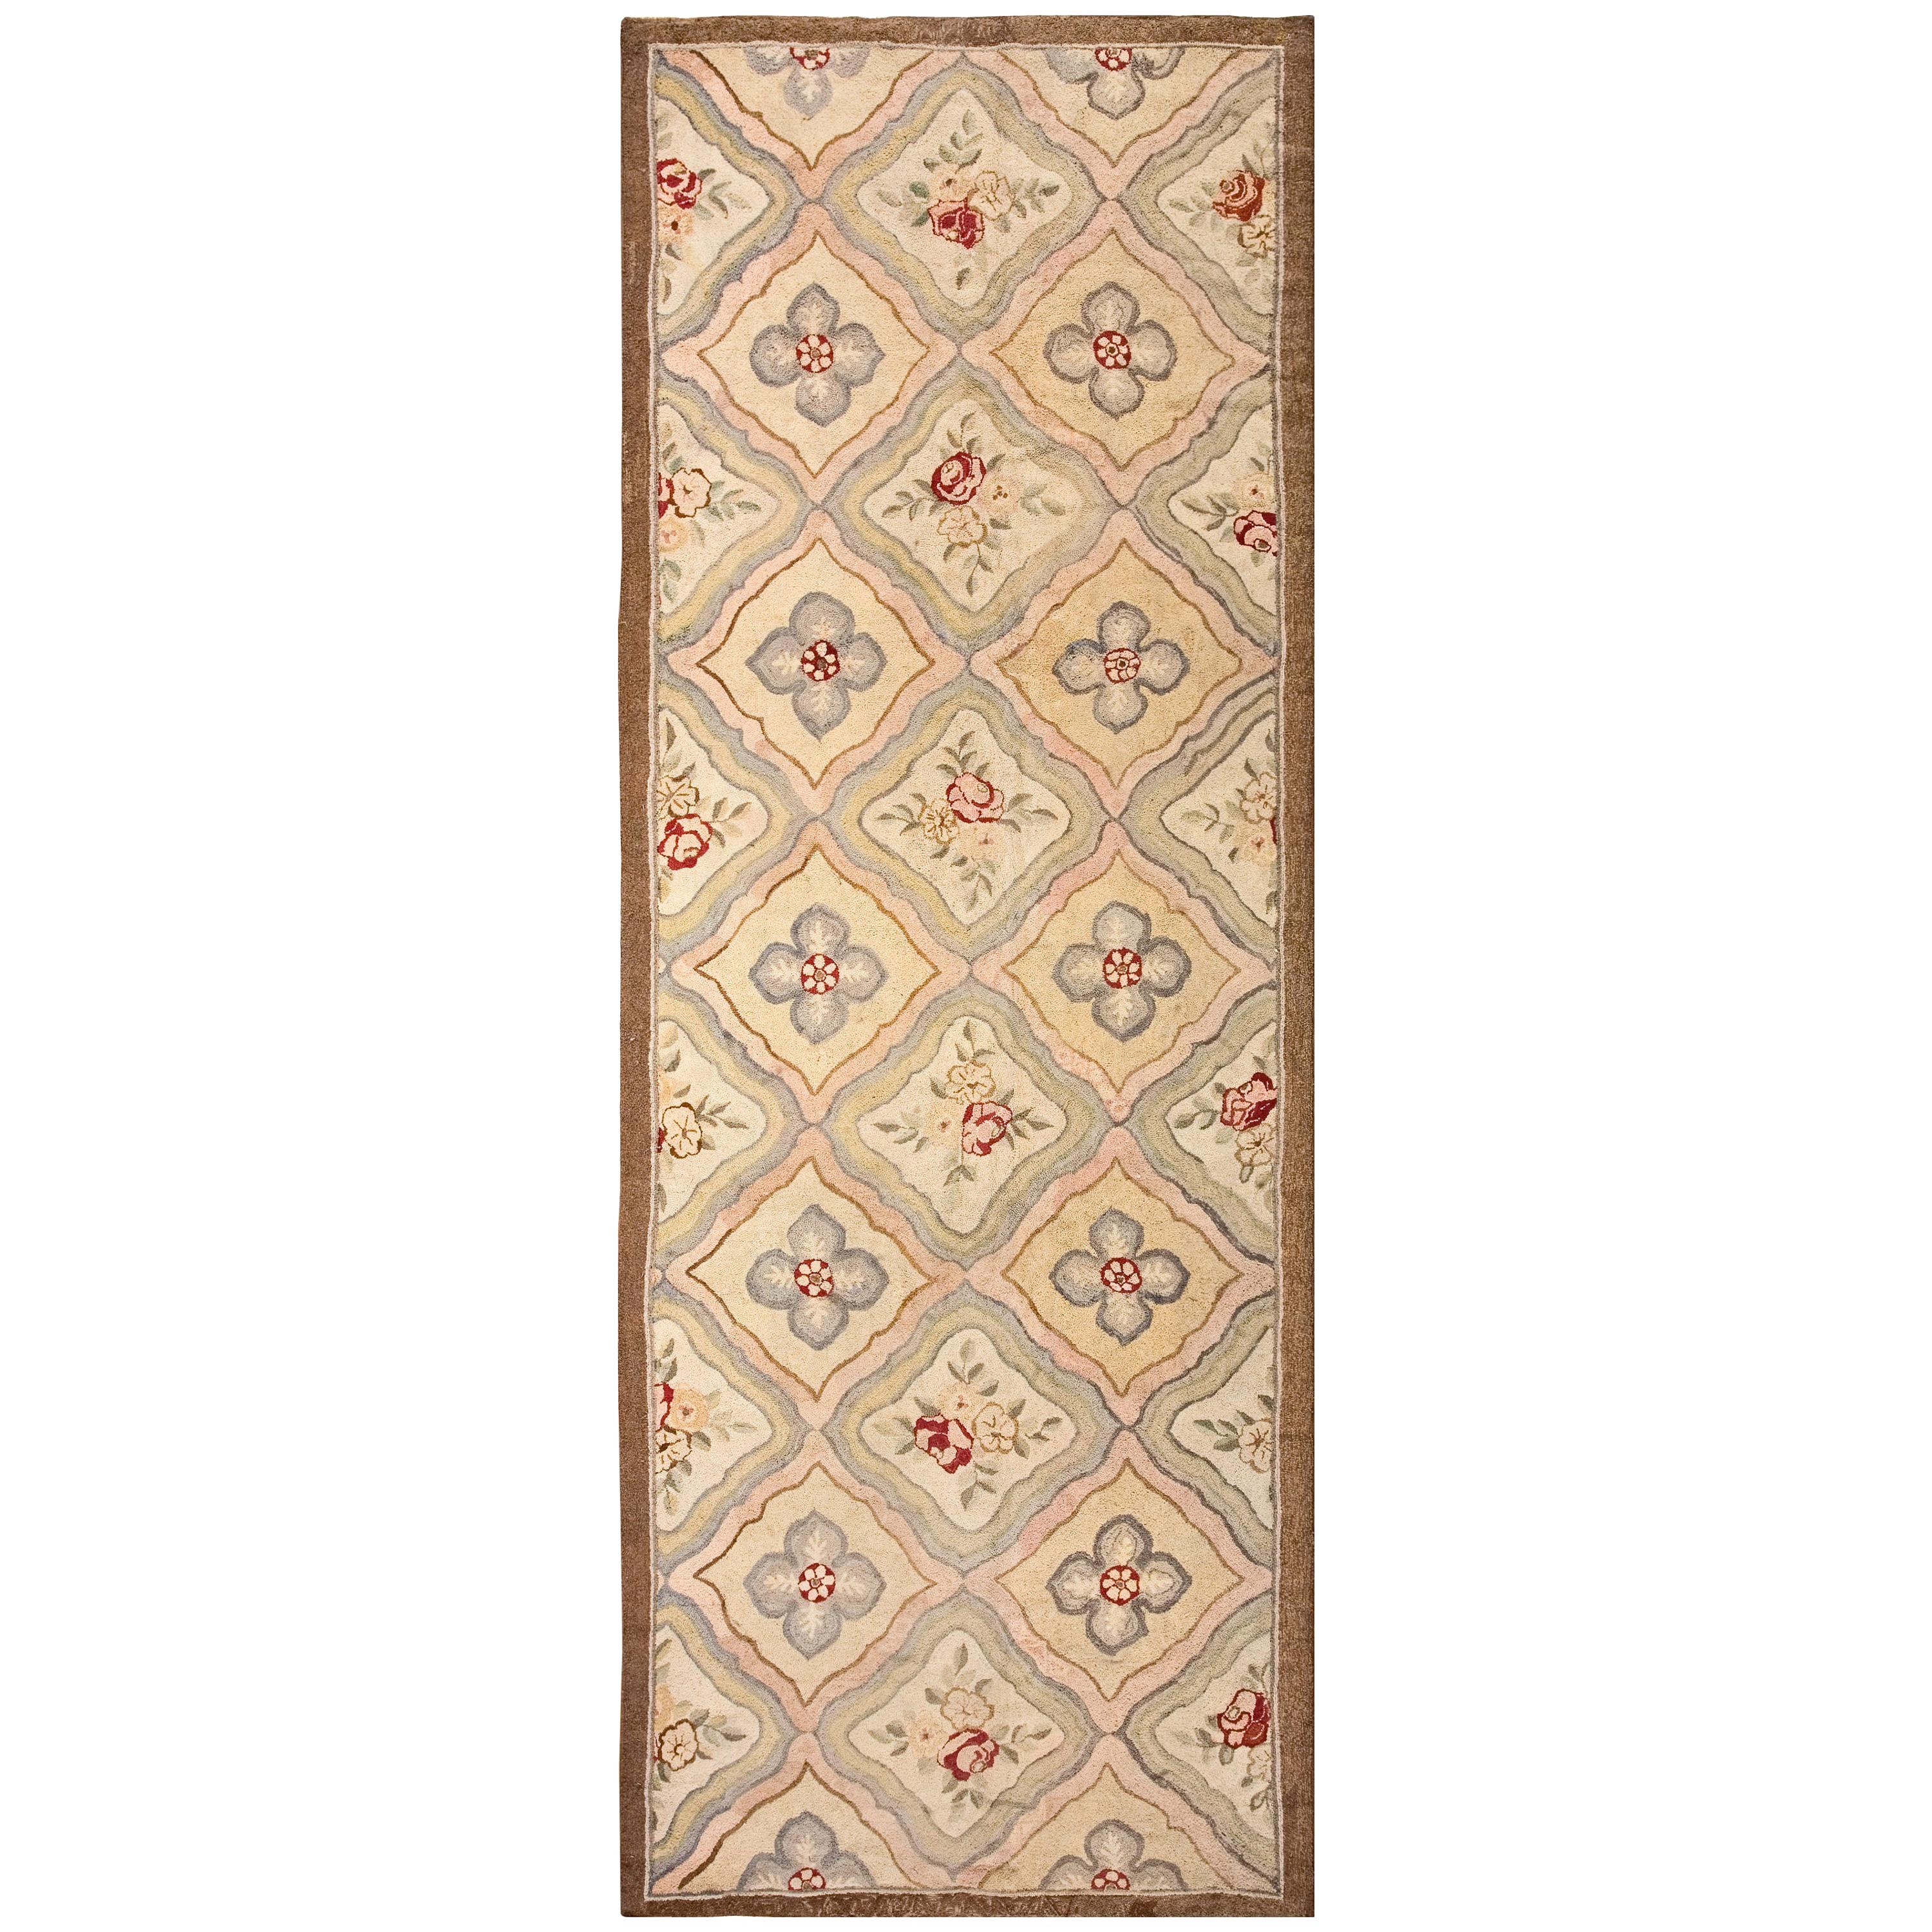 Early 20th Century Canadian Hooked Carpet ( 5'4" x 14'6'' - 163 x 442 ) For Sale